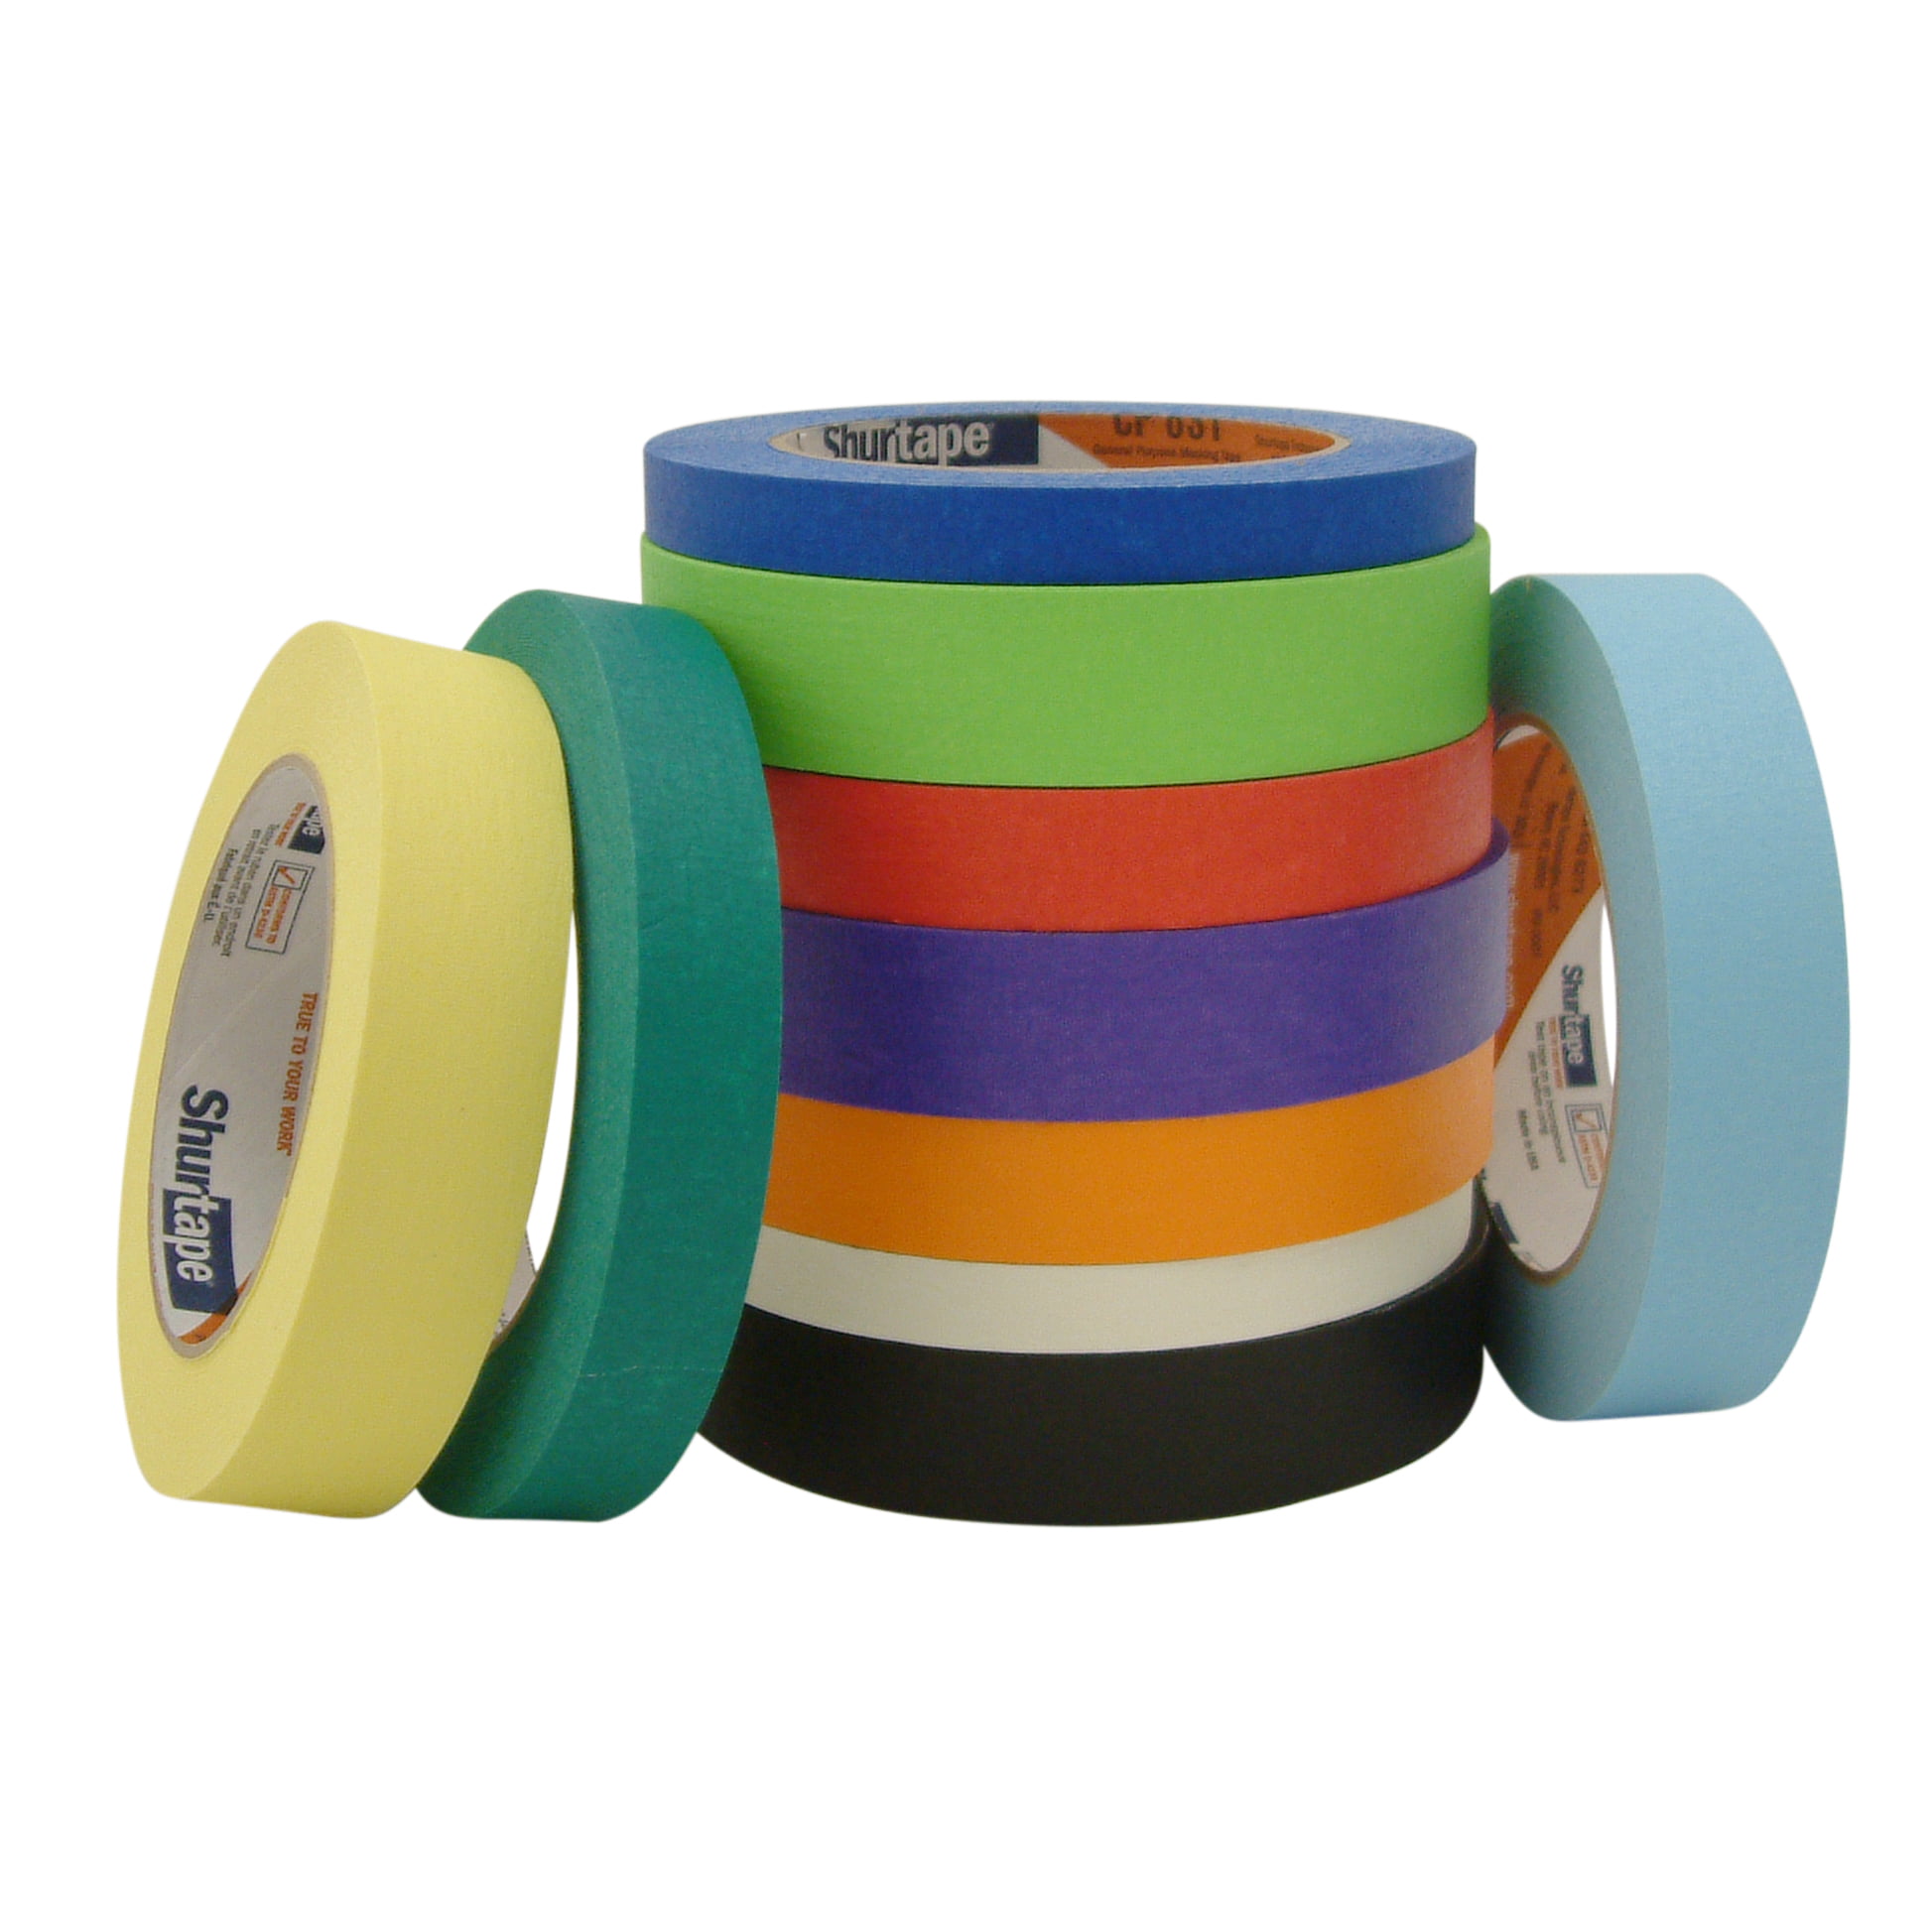 Shurtape CP-631 Colored Masking Tape 3/4 in Black x 60 yds. 